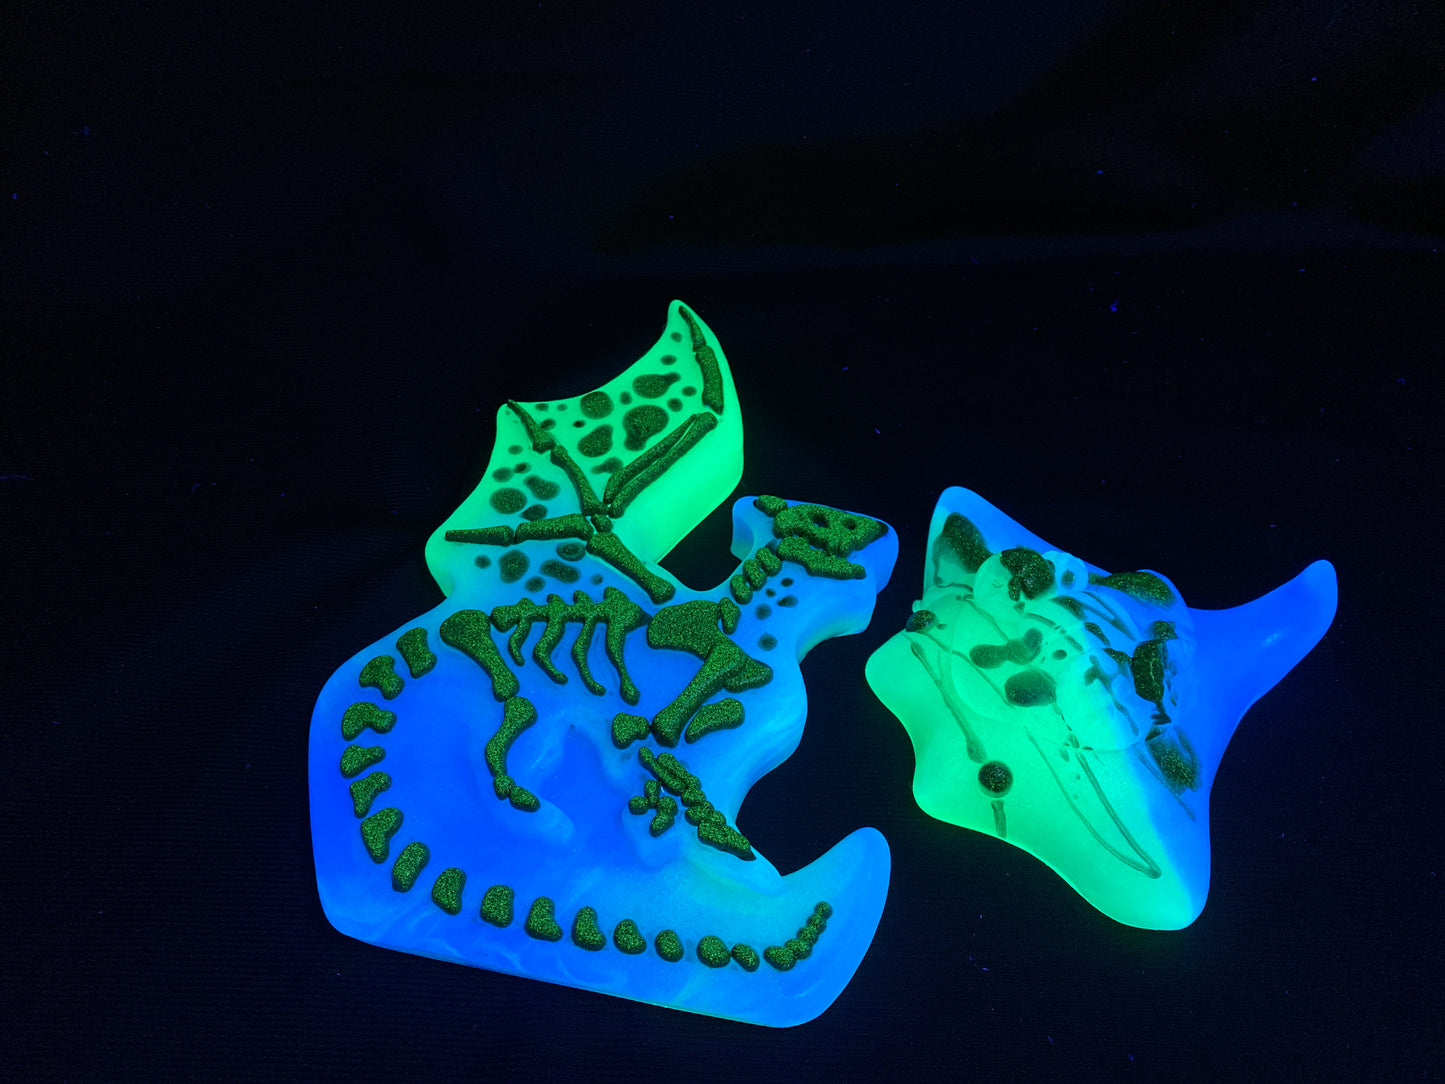 two glow in the dark objects on a black surface